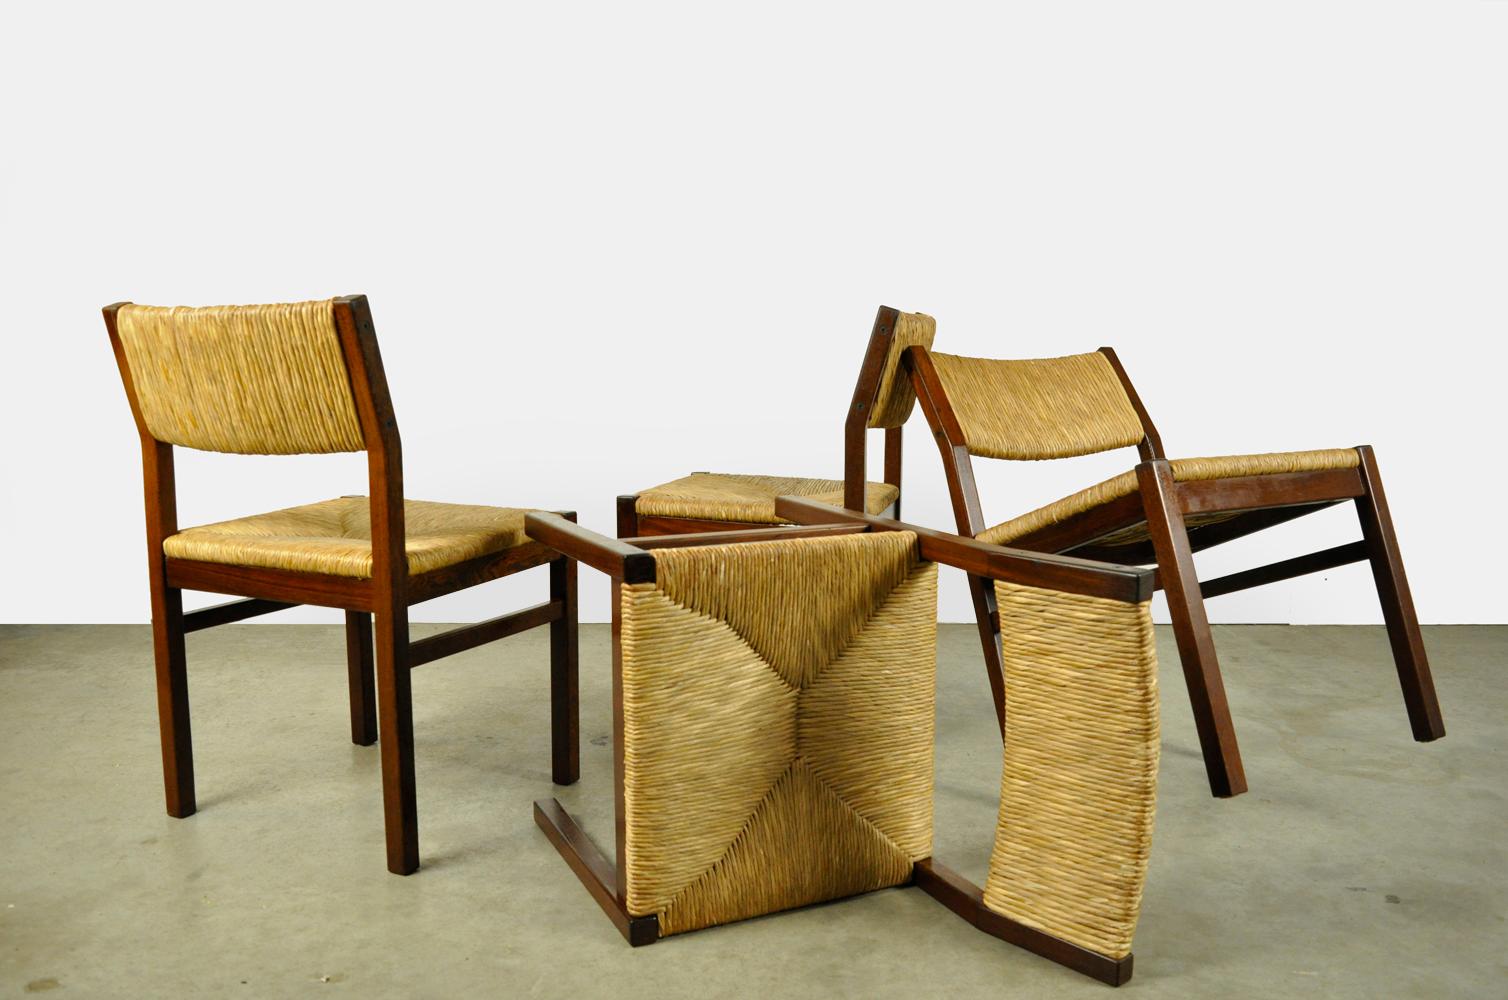 Set of 4 vintage dining chairs with reed seat by Pastoe, 1970s Netherlands For Sale 1